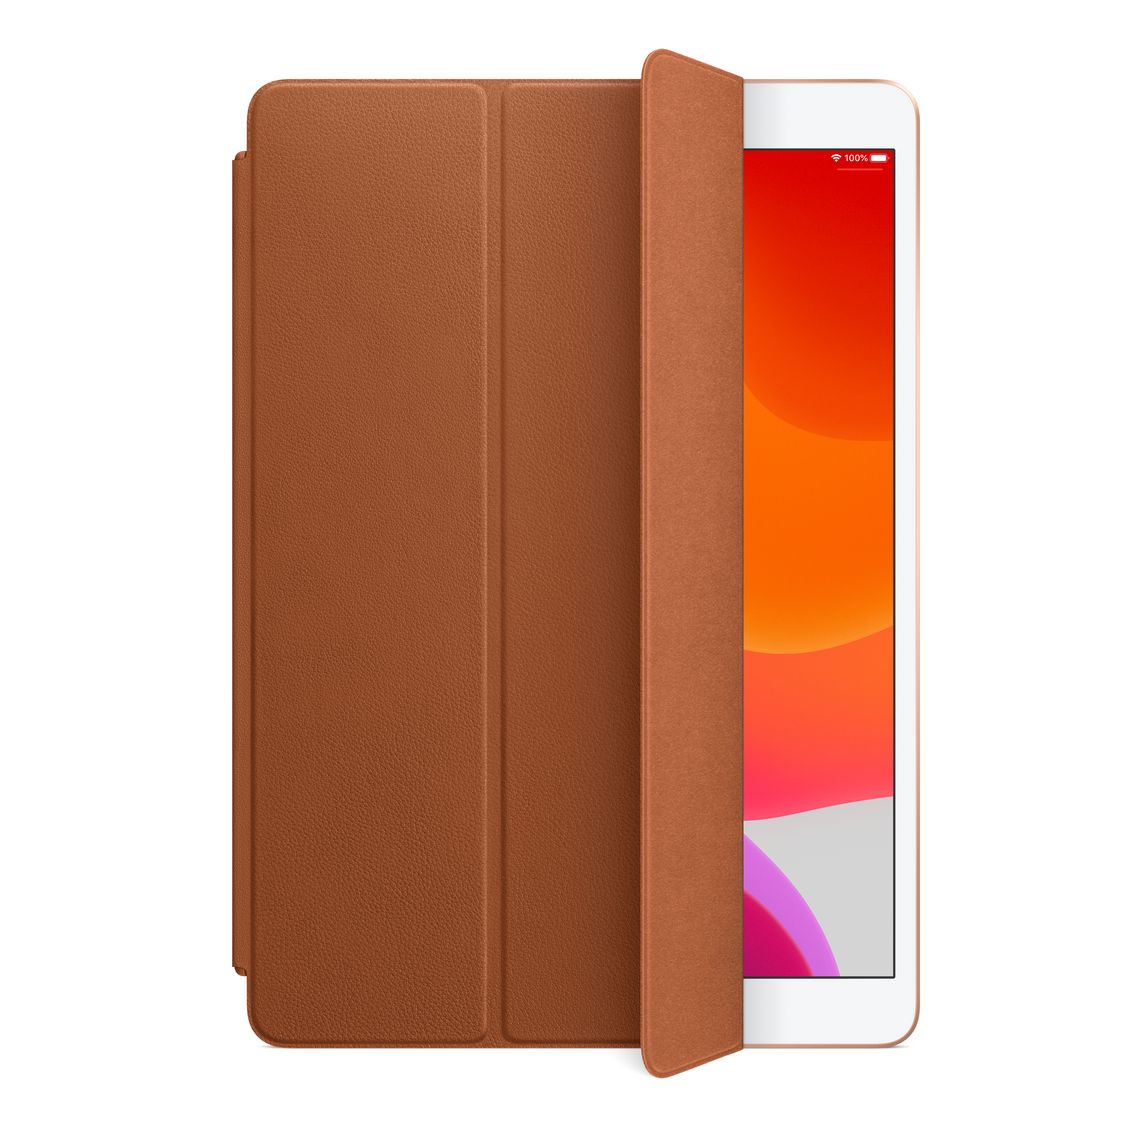 Leather Smart Cover for iPad (7th generation) and iPad Air (3rd generation)